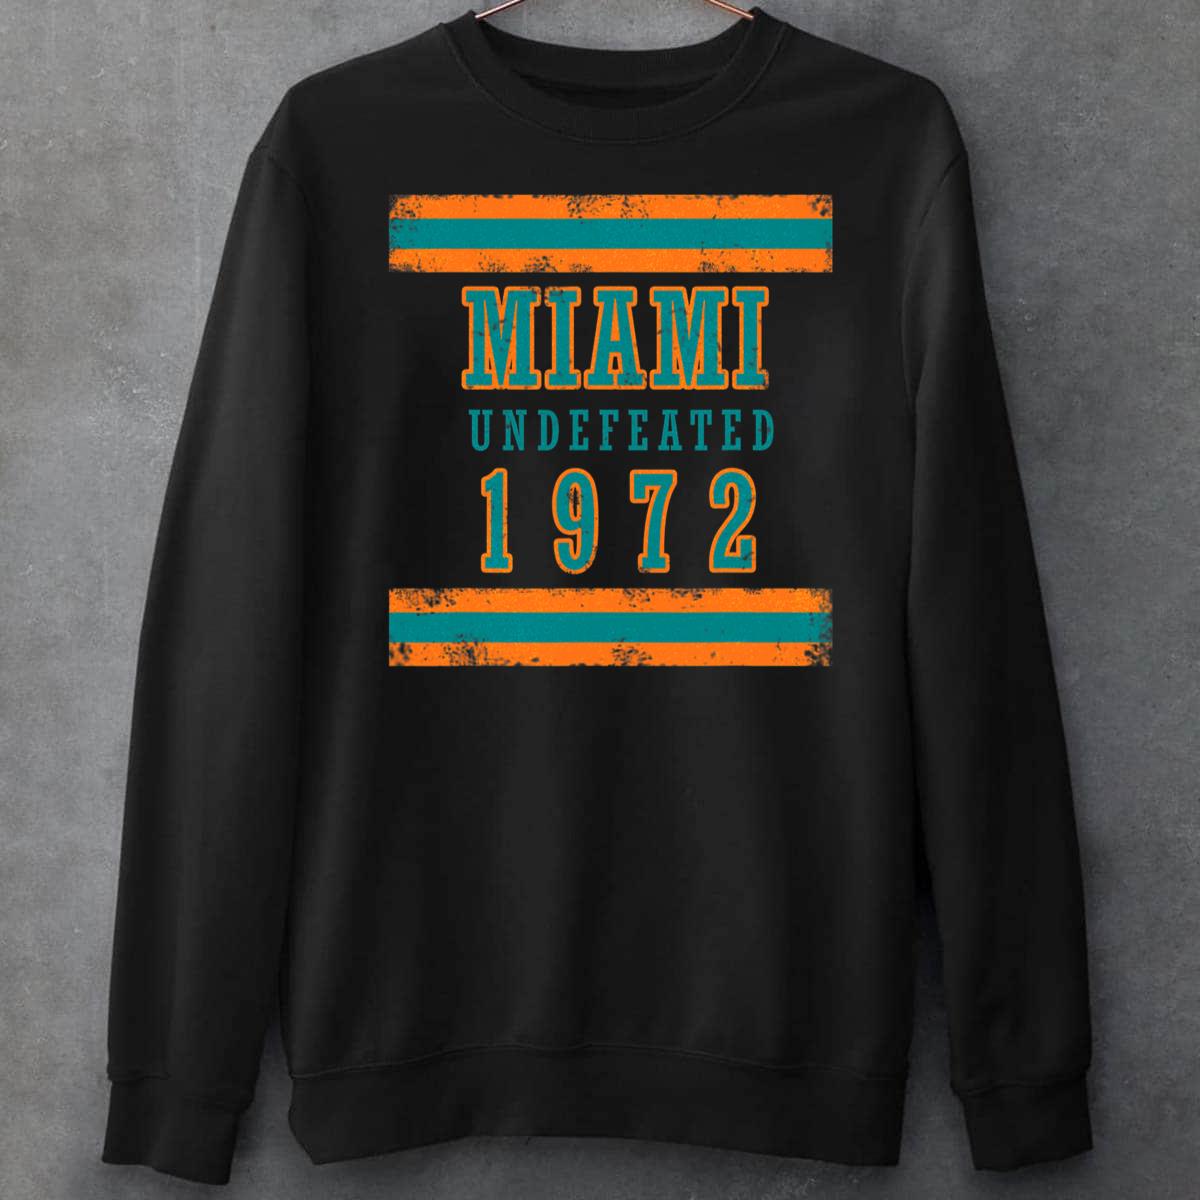 miami undefeated 1972 t shirt 1a9nx94702